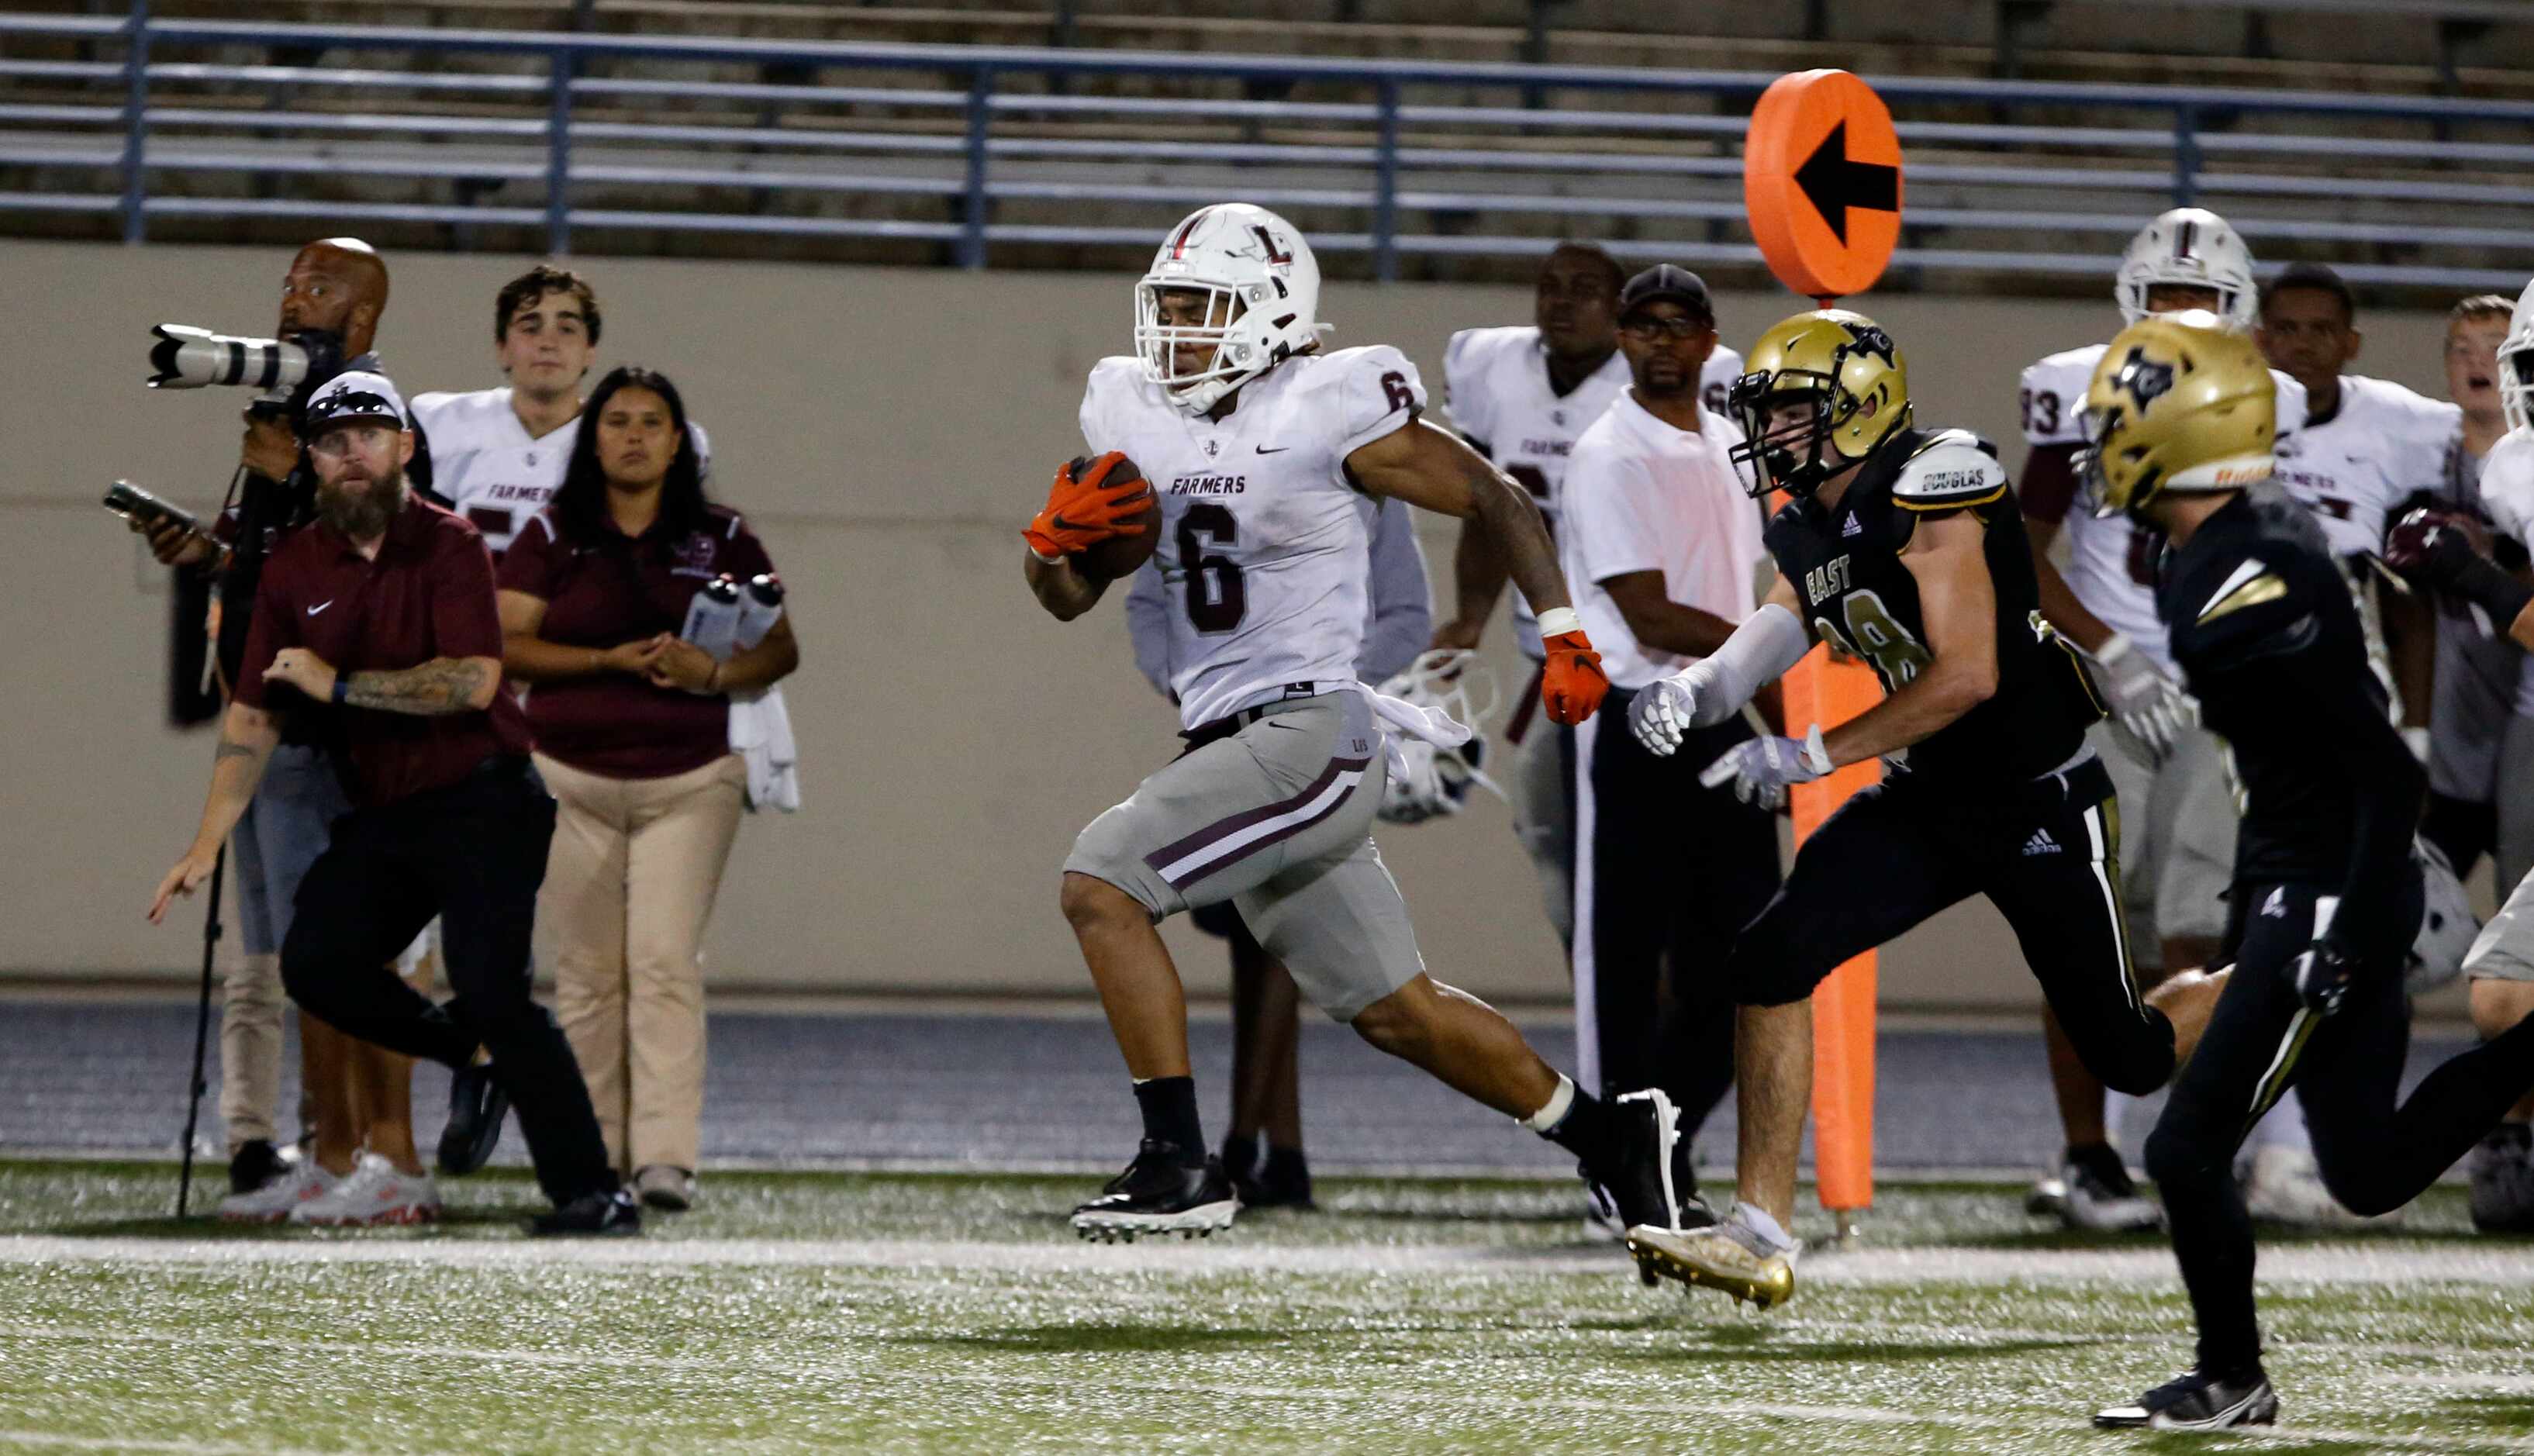 Lewisville RB Damien Martinez (6) heads to the end zone for another Farmers’ touchdown in a...